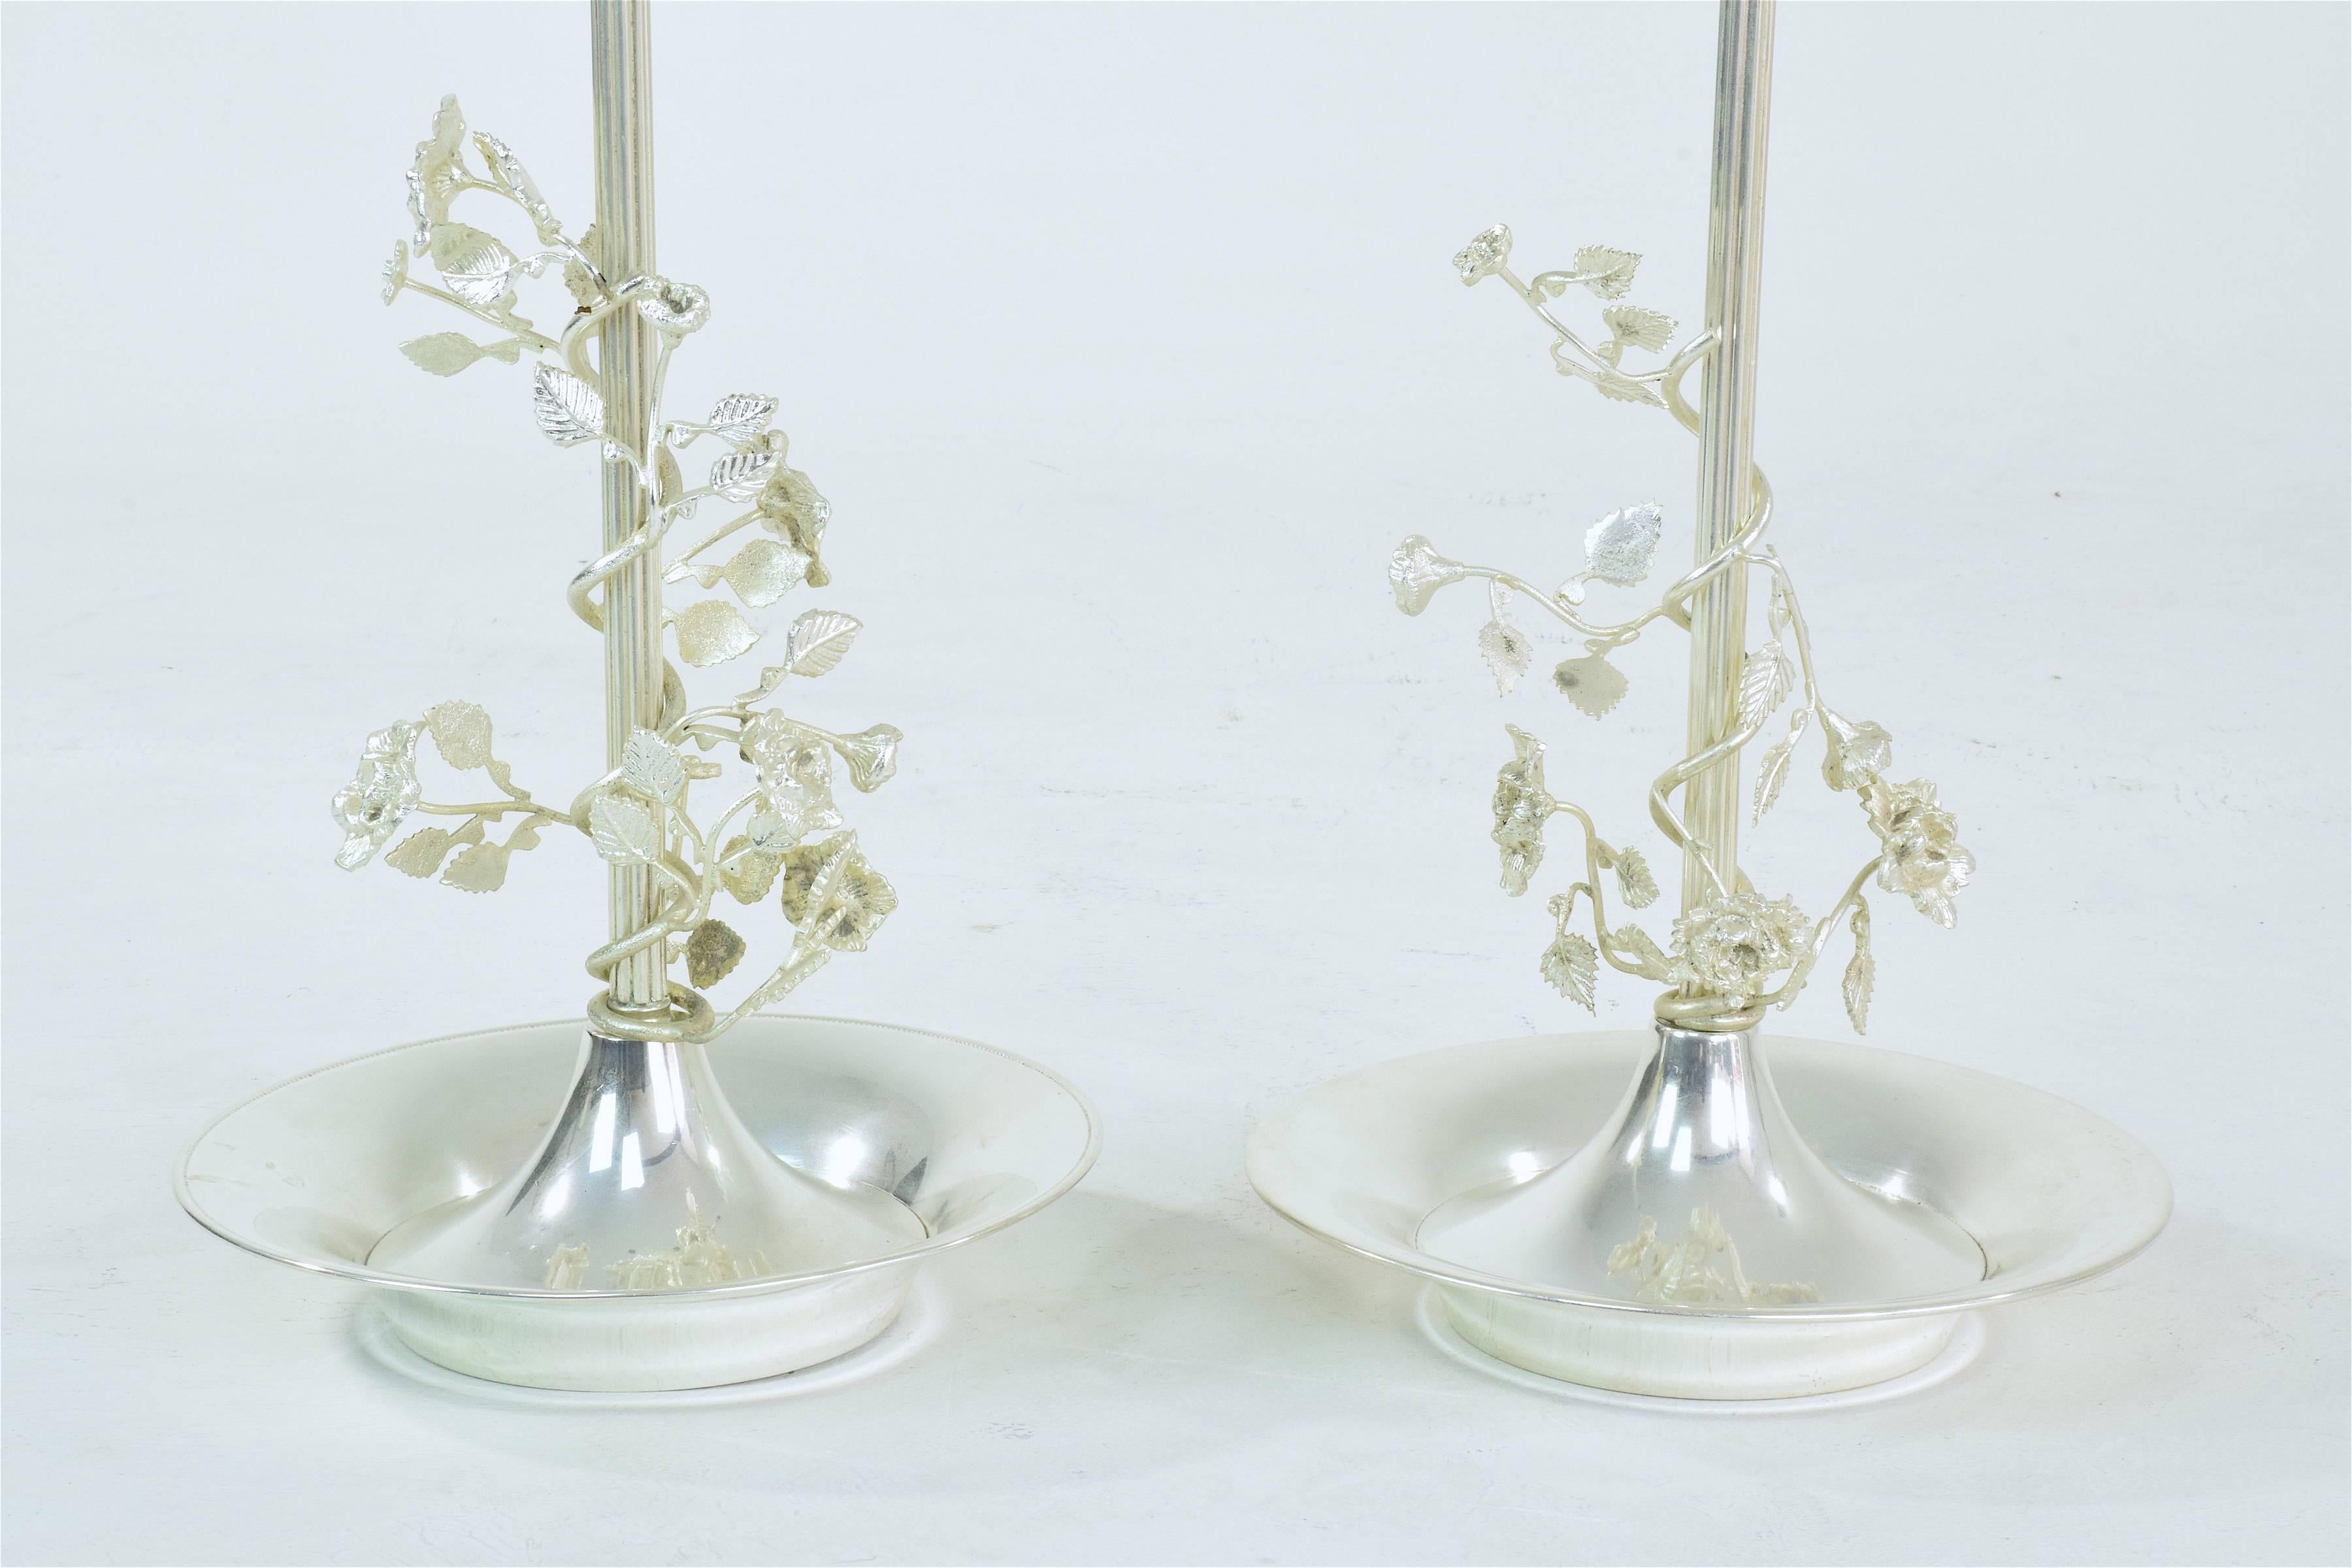 20th Century Pair of Silver Plated Flower Lamps, Spain, 1960s For Sale 2